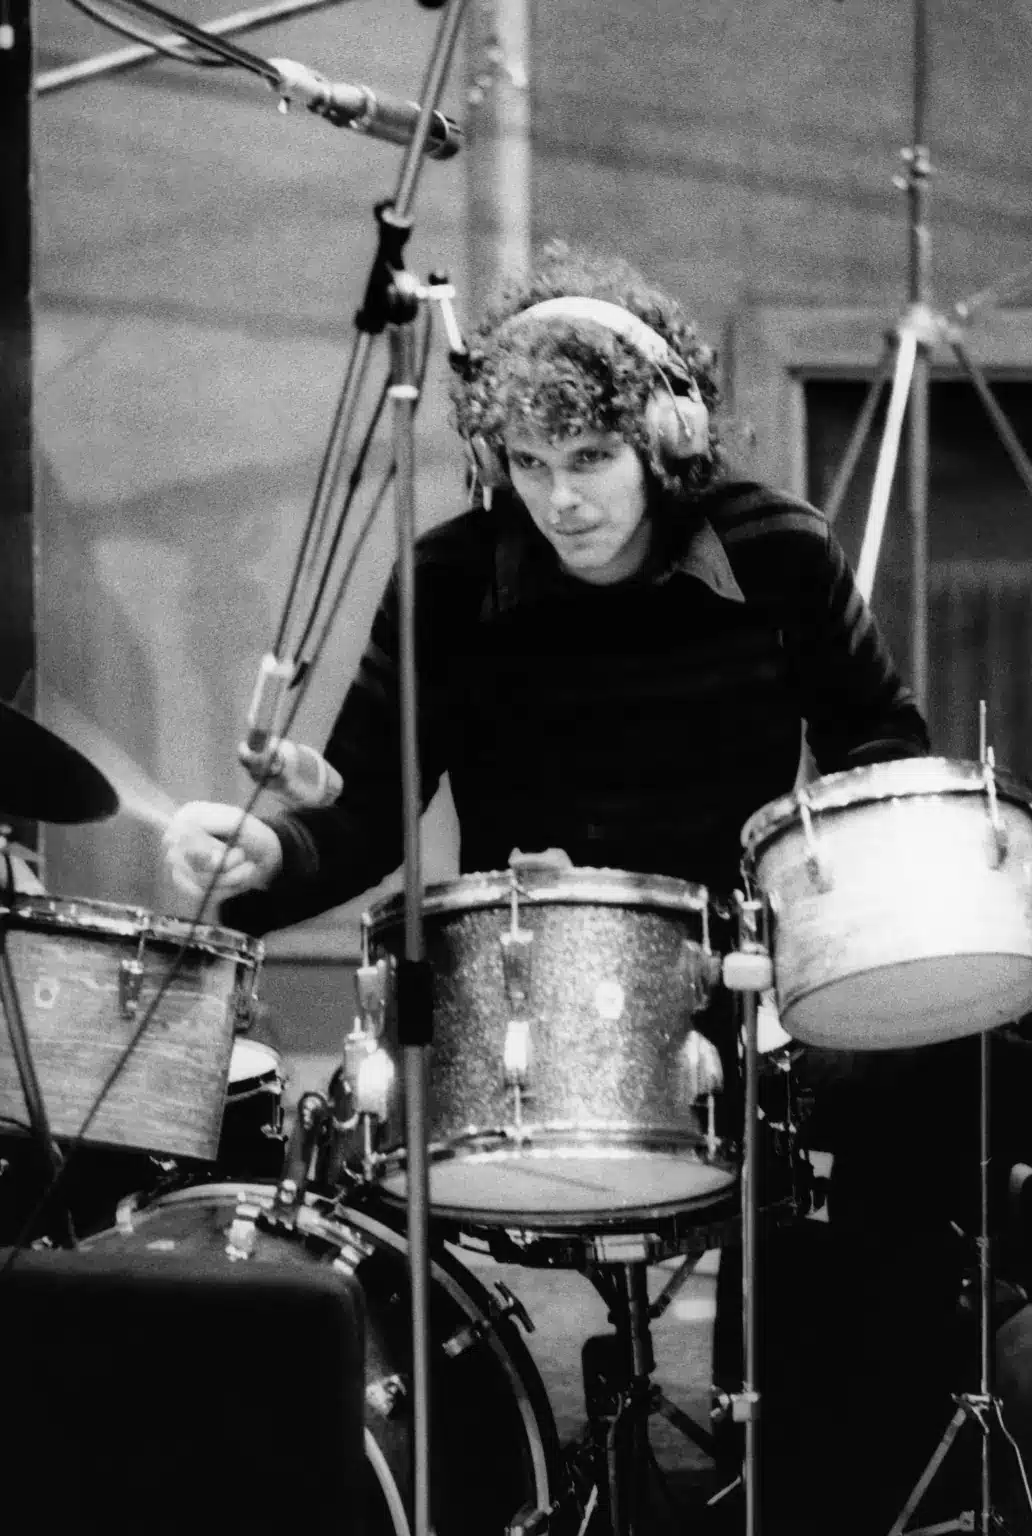 Gordon was a session drummer for Eric Clapton and George Harrison